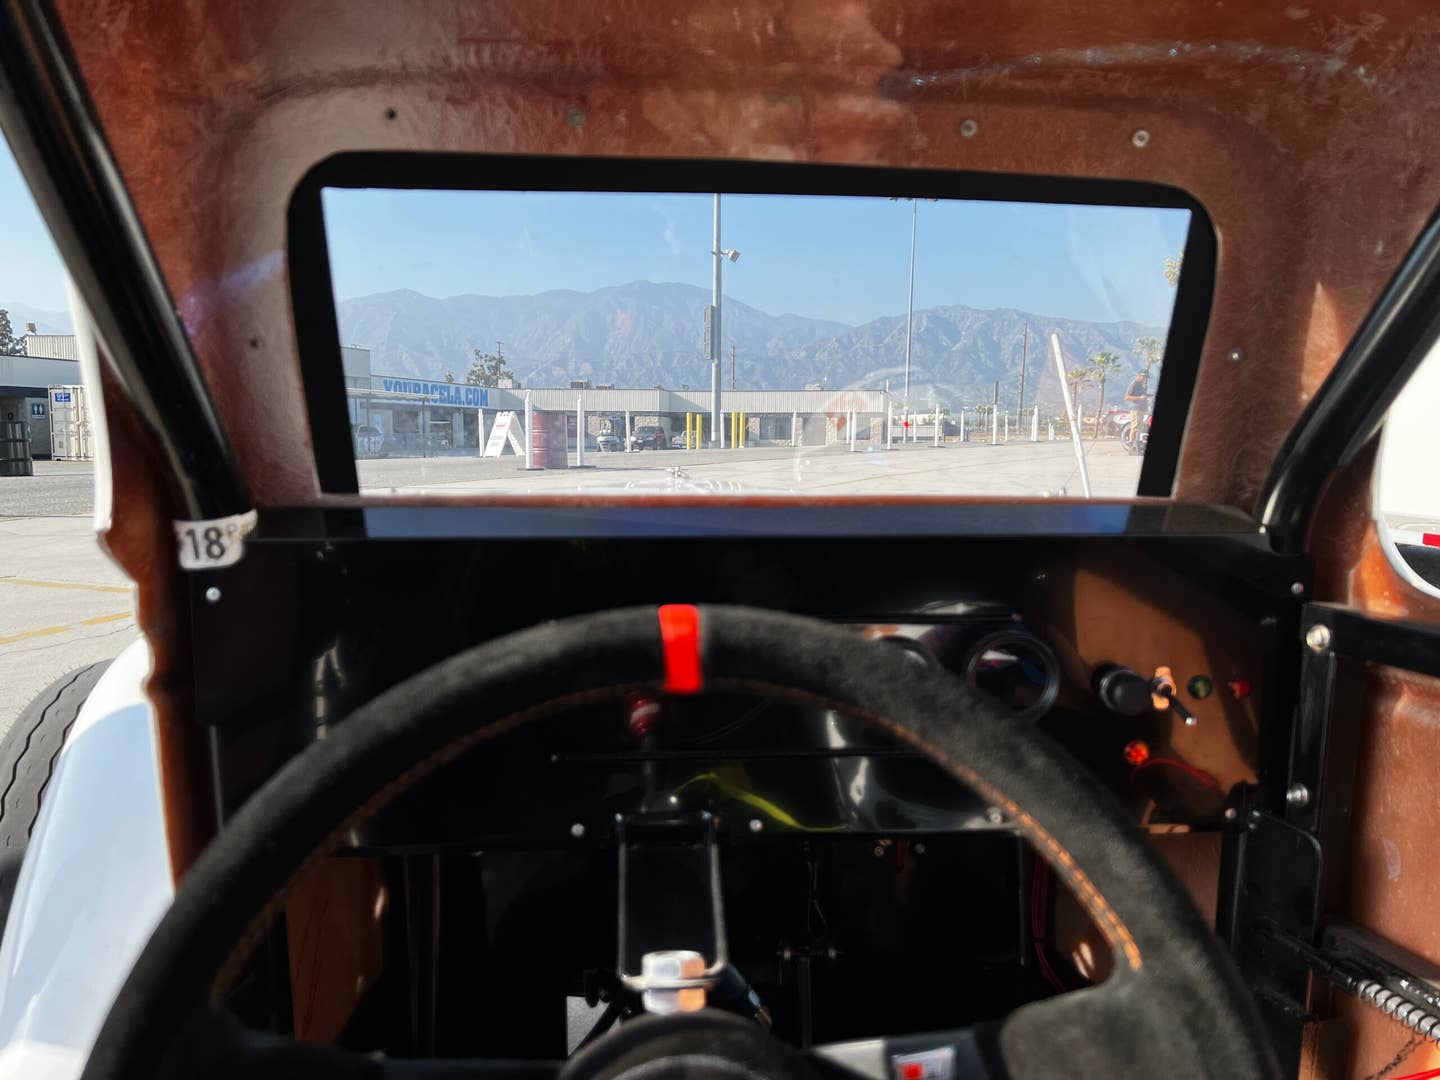 The view from the Legend car driver's seat | Chris Rosales